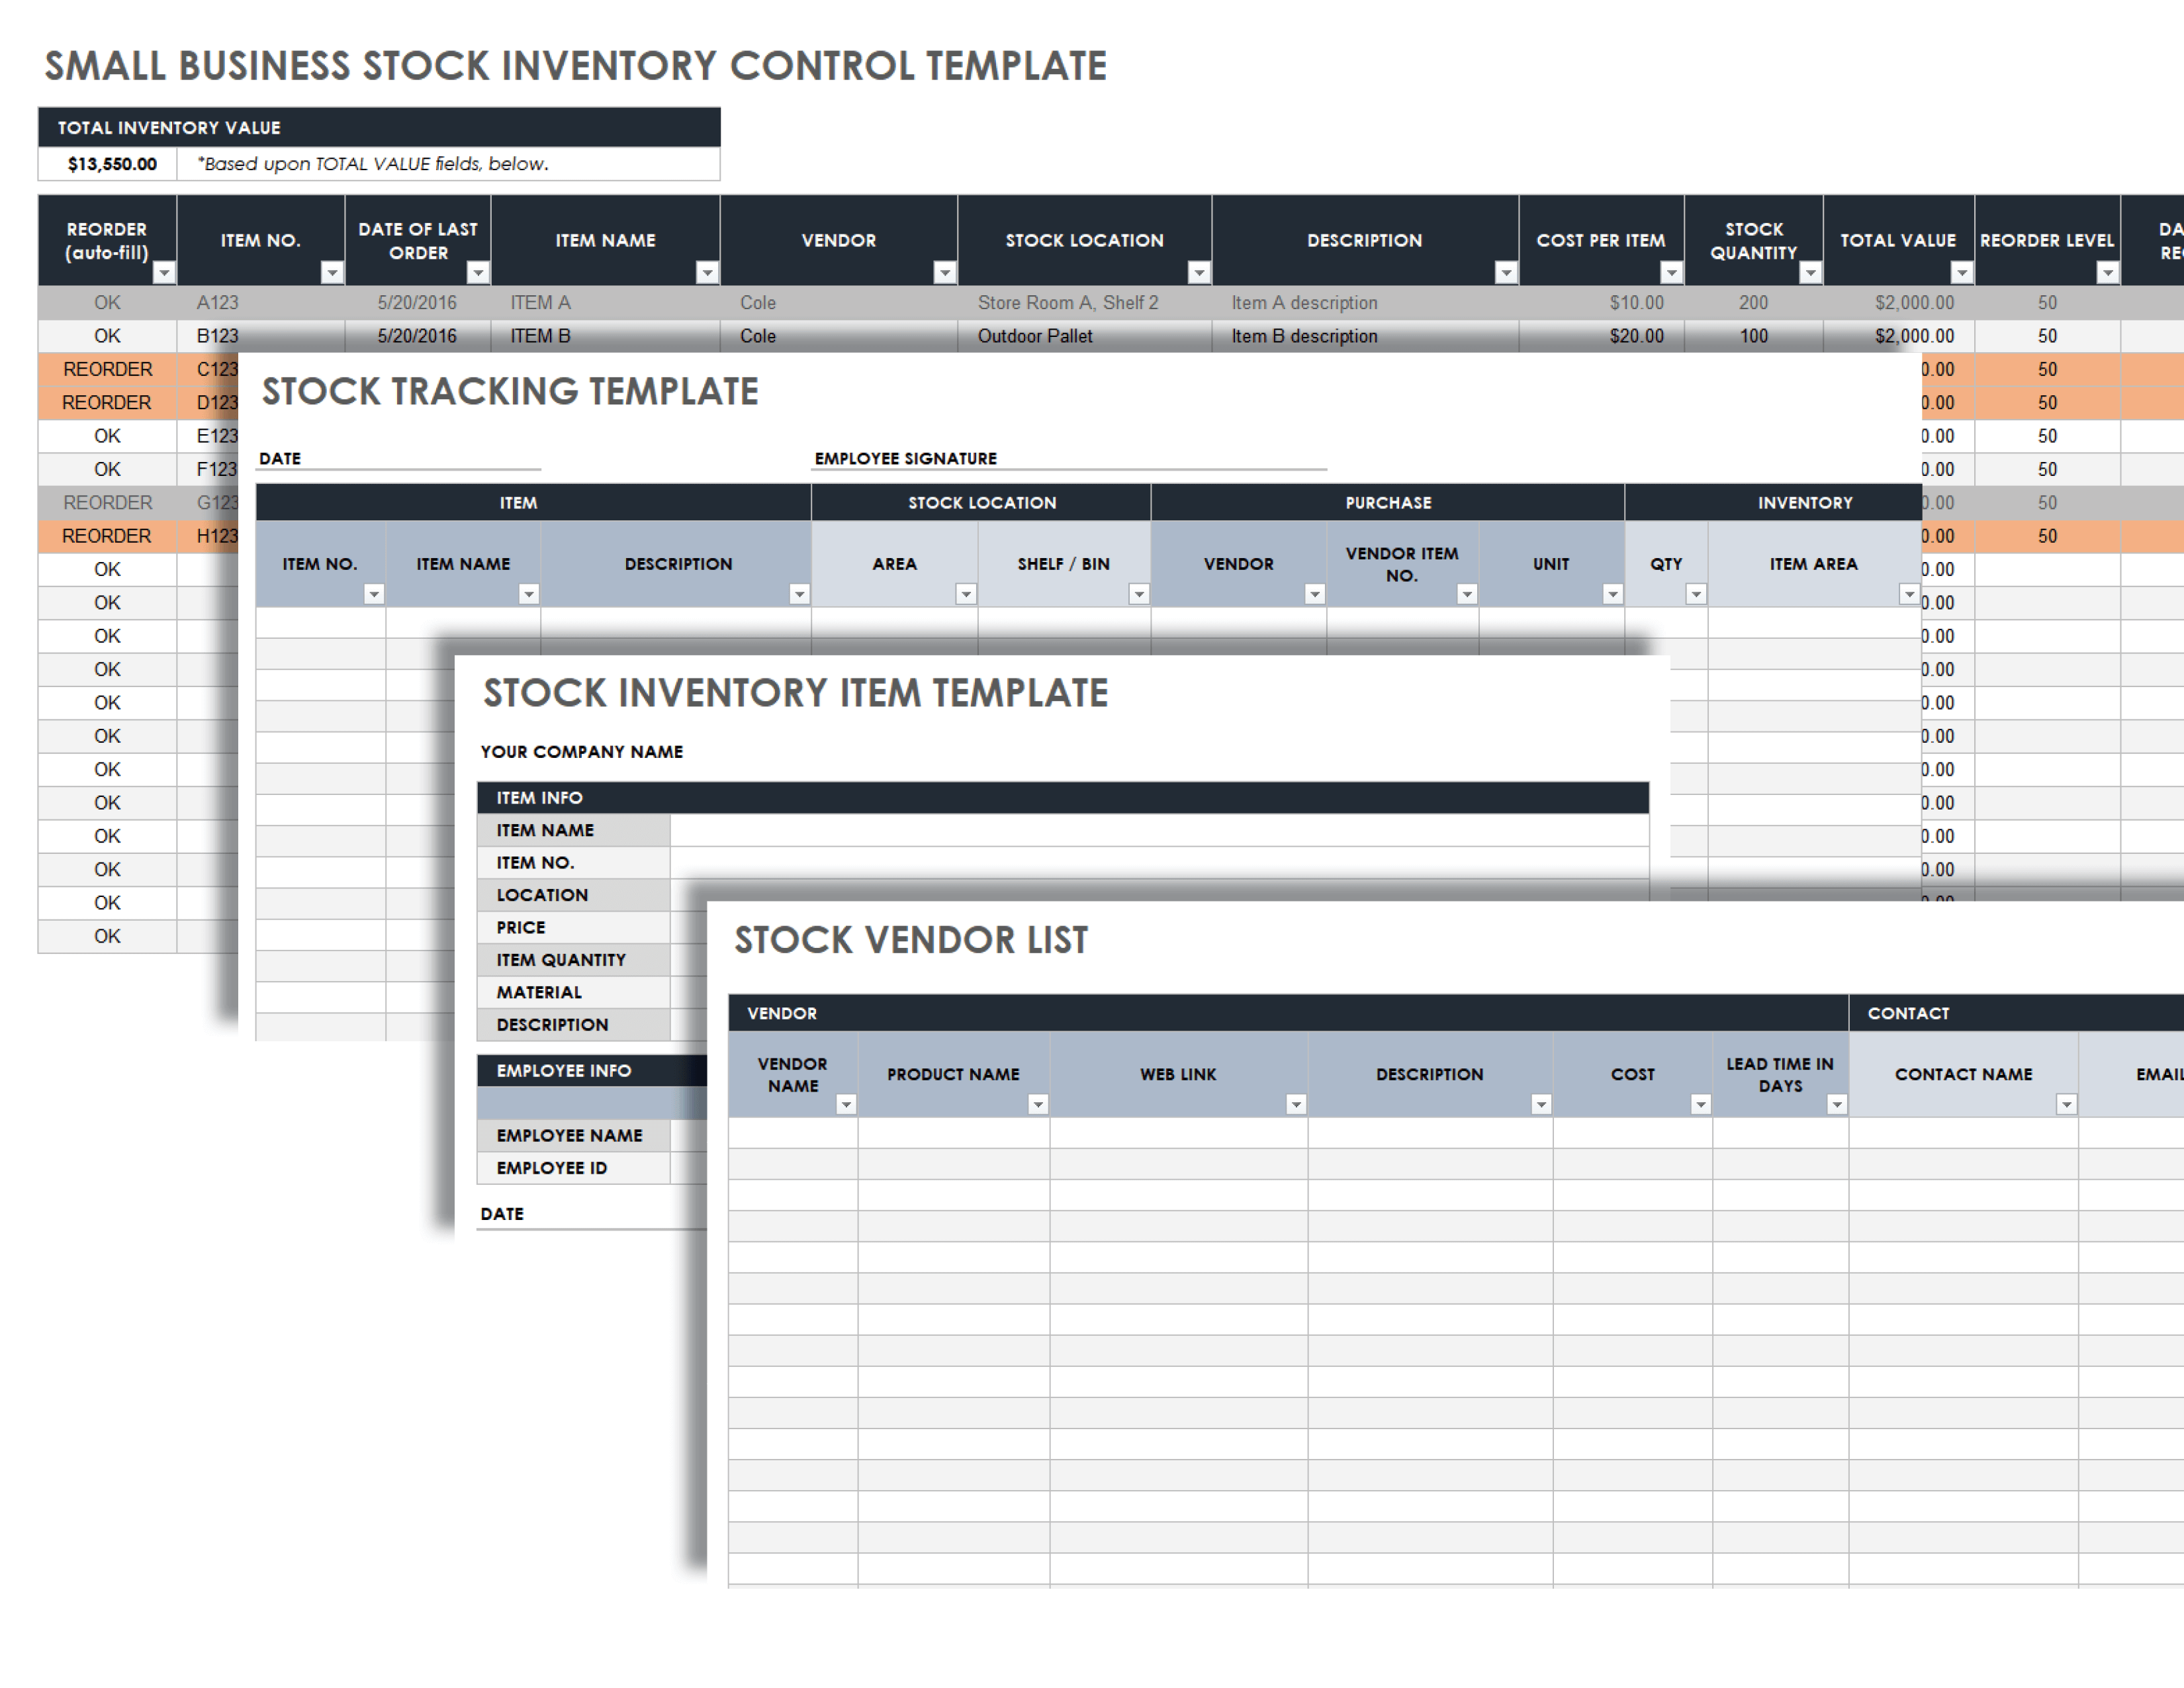 Small Business Stock Inventory Control Template